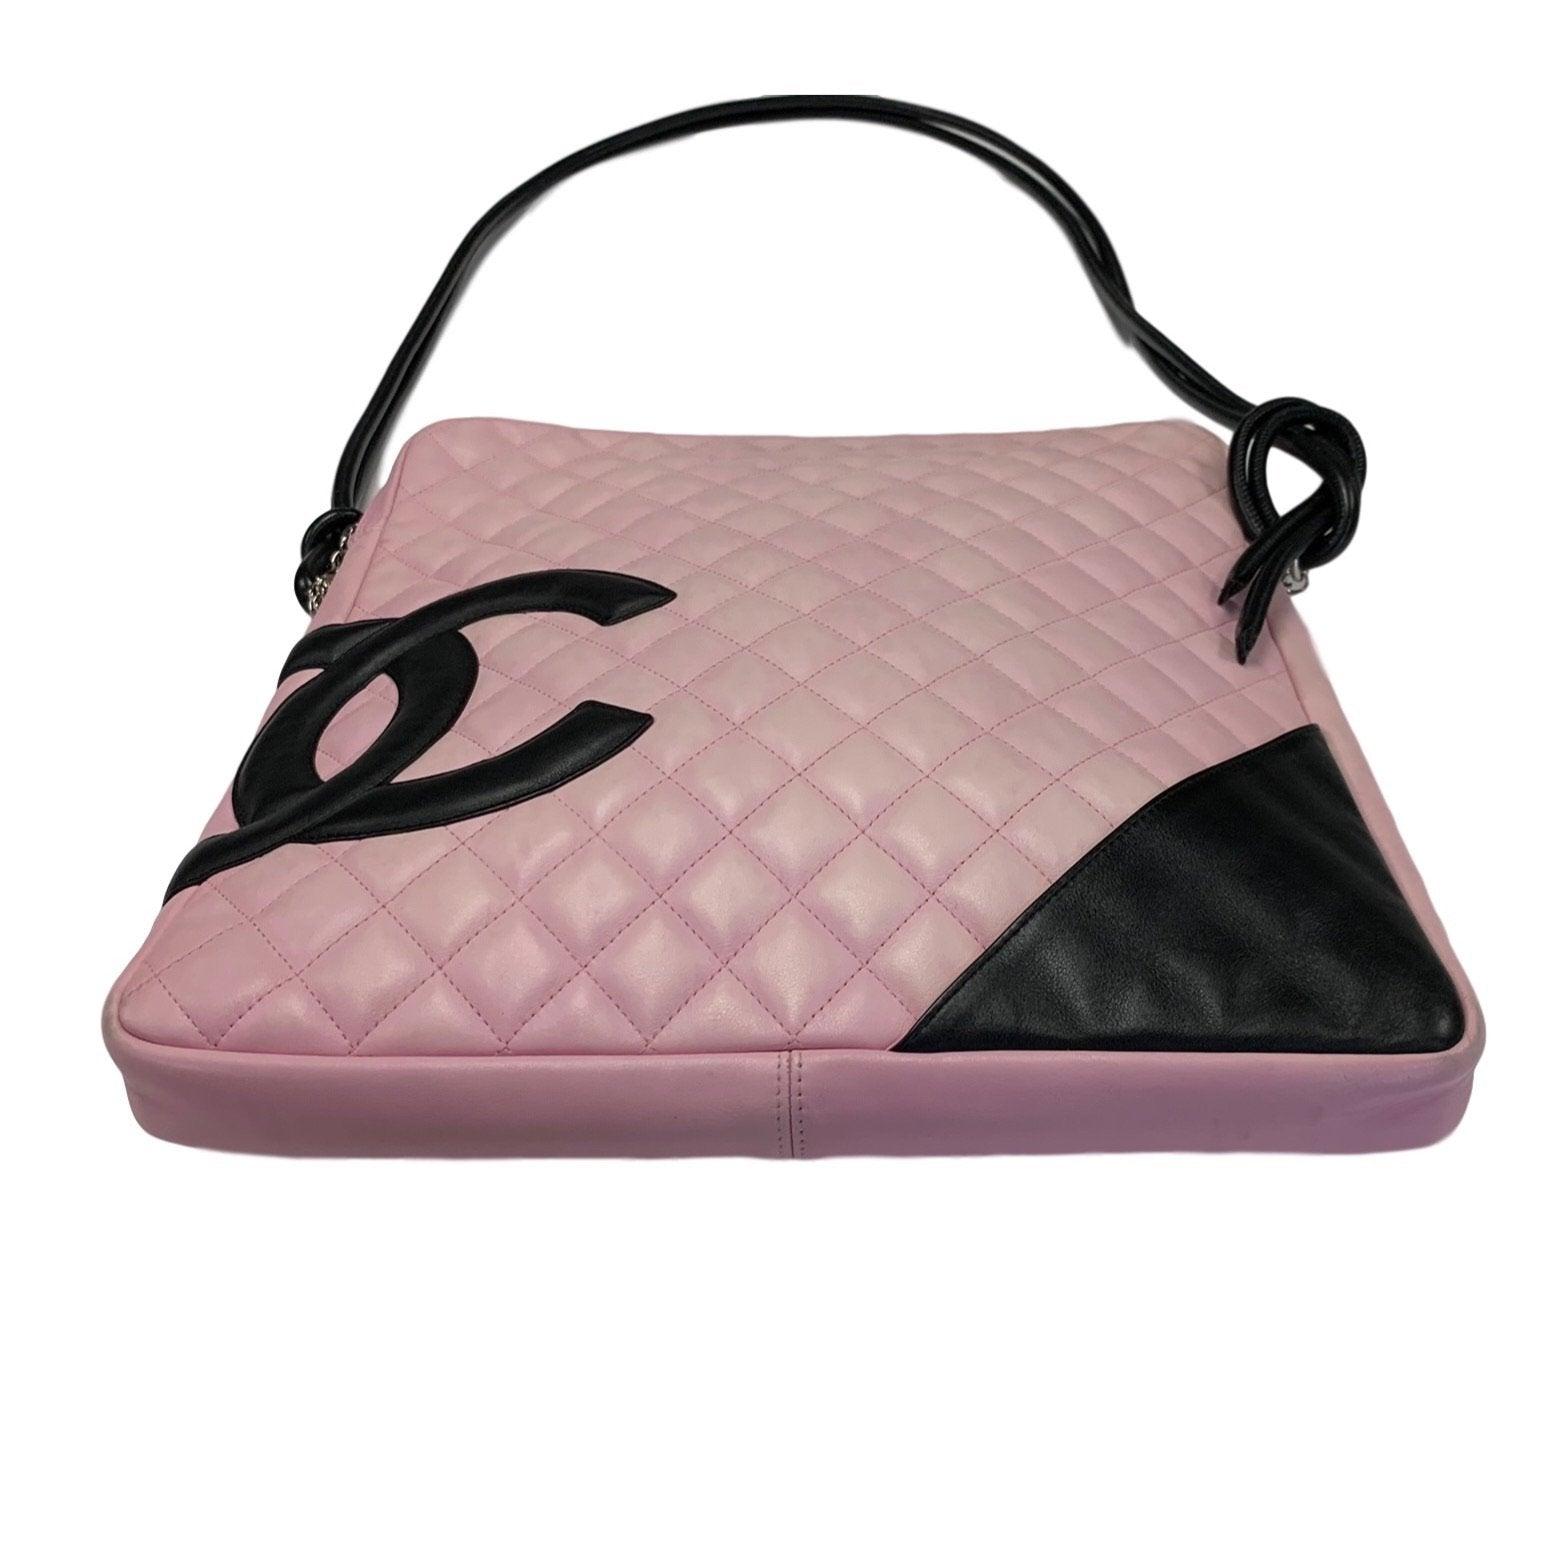 Chanel Cambon Pink Black Lambs Leather Large Shoulder Tote Bag